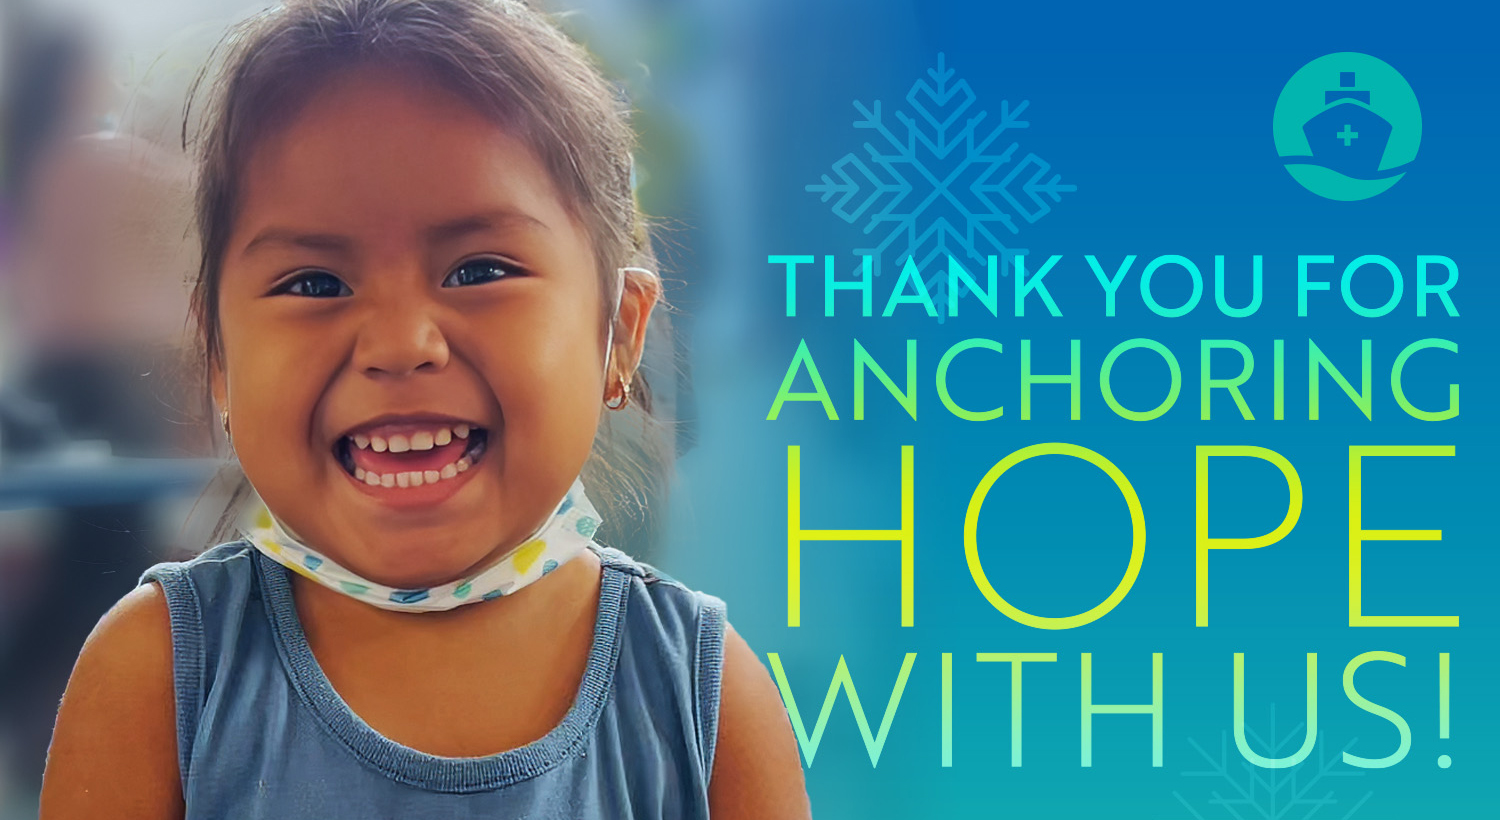 Thank you for anchoring hope with us!